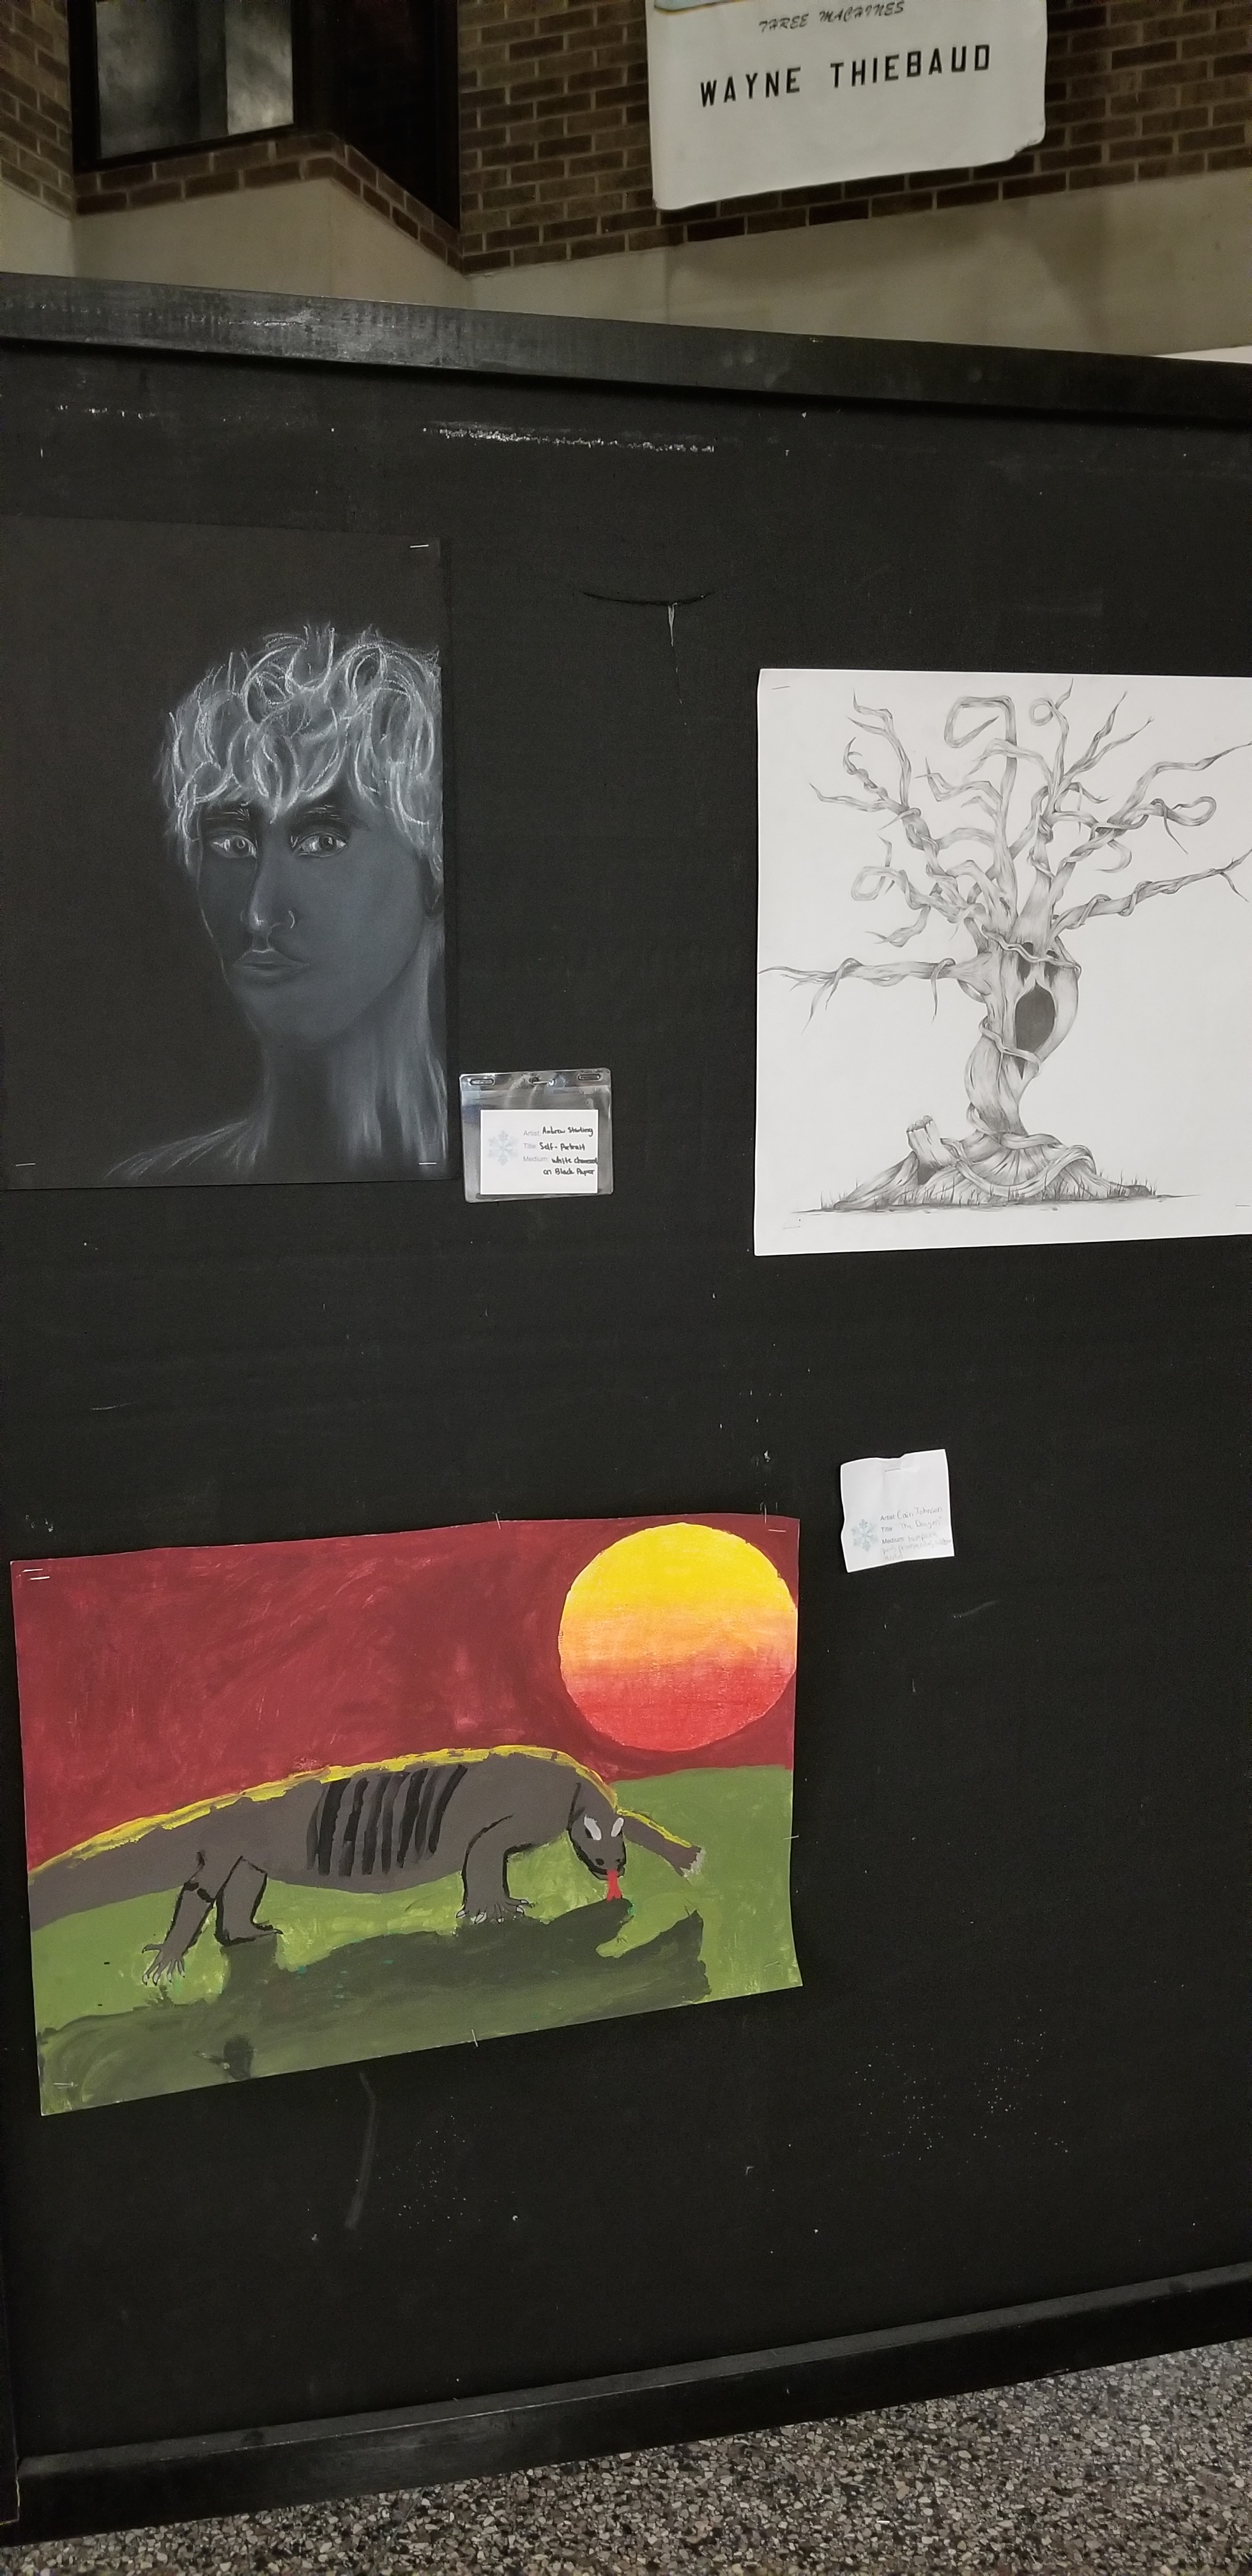 Central High School Night of the Arts, December 2018